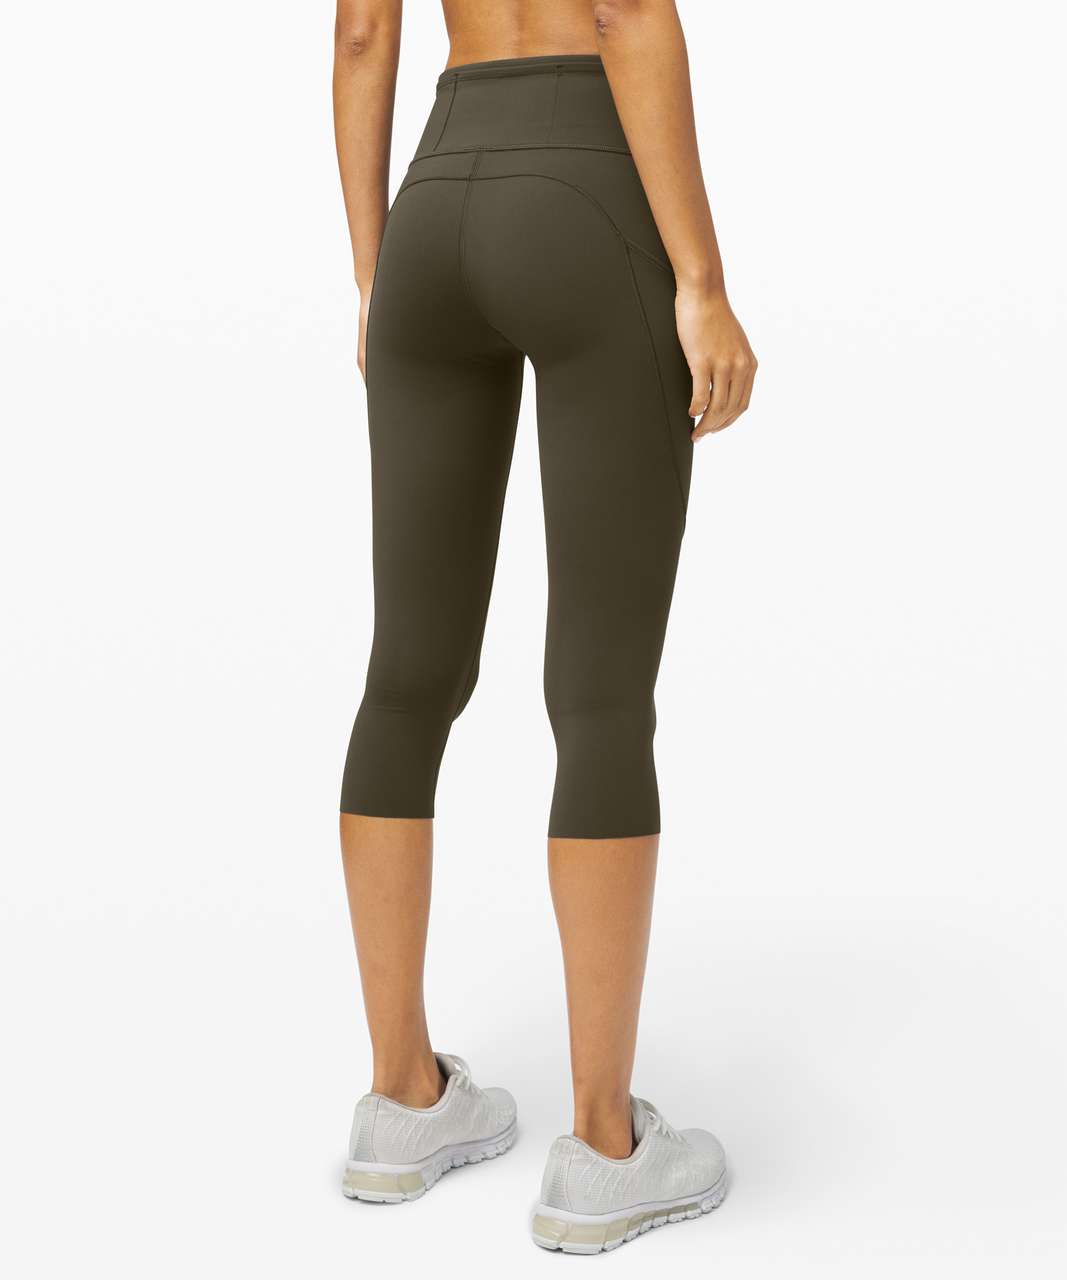 Lululemon Fast and Free Crop II 19" *Non-Reflective - Dark Olive